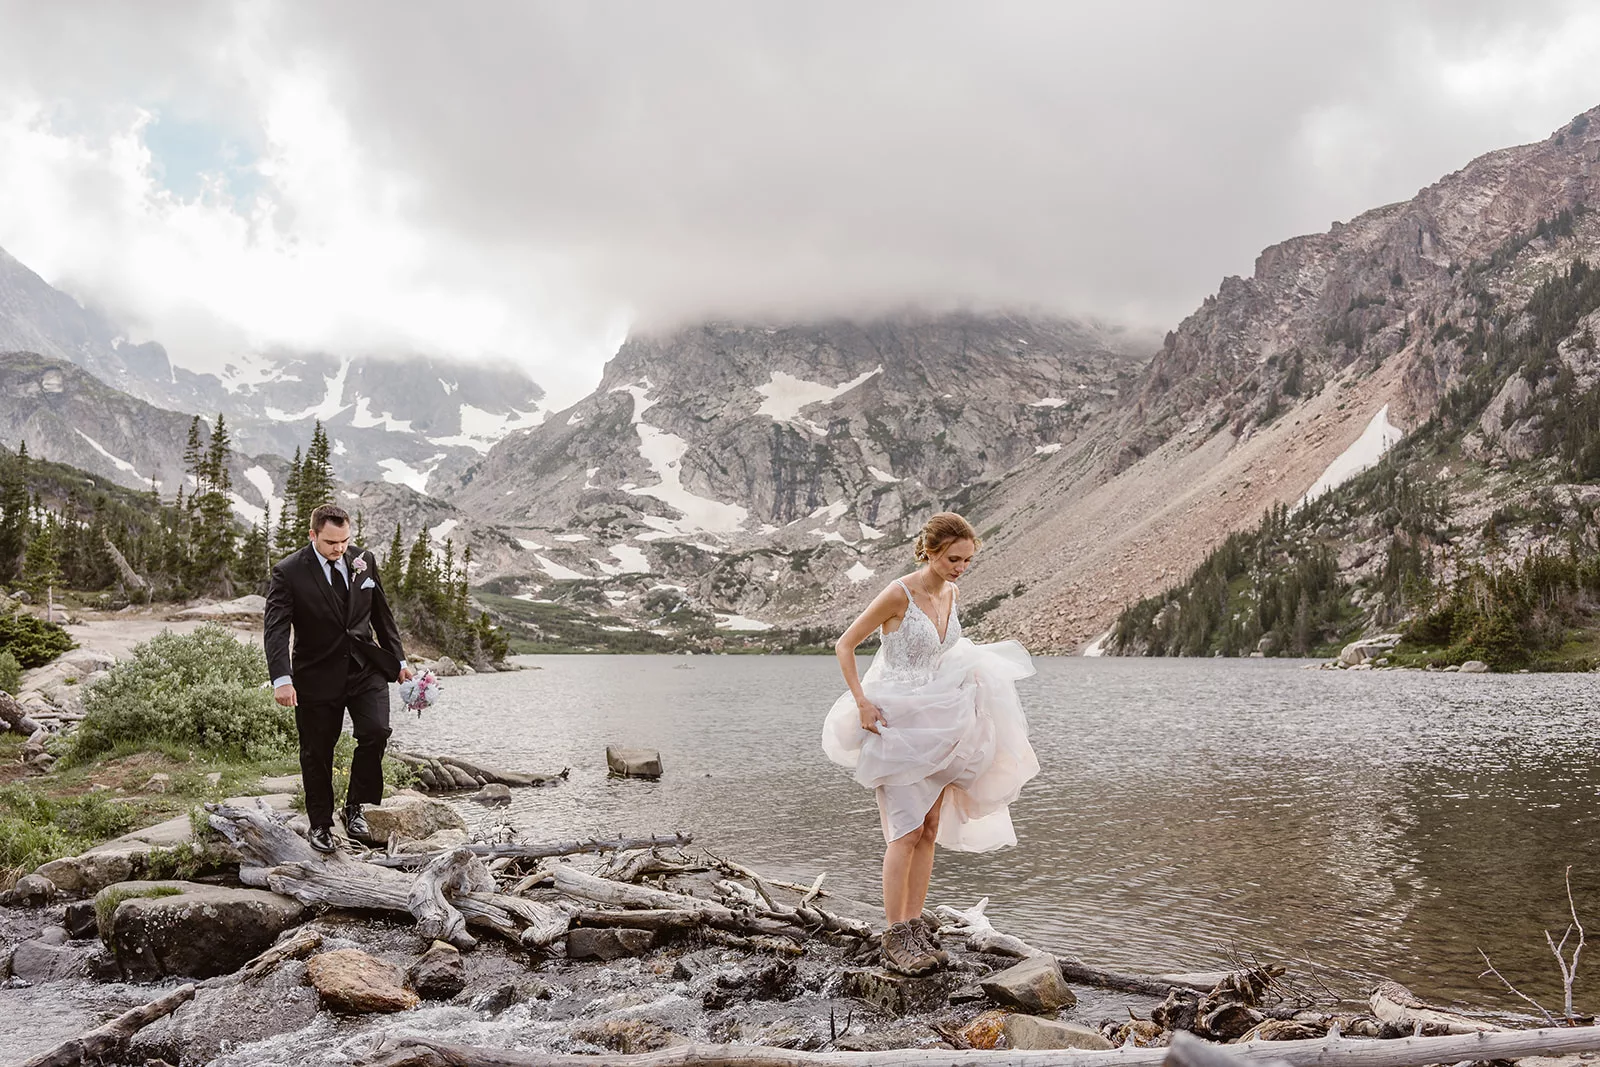 A bride and groom adventure across a lake during their Colorado elopement.